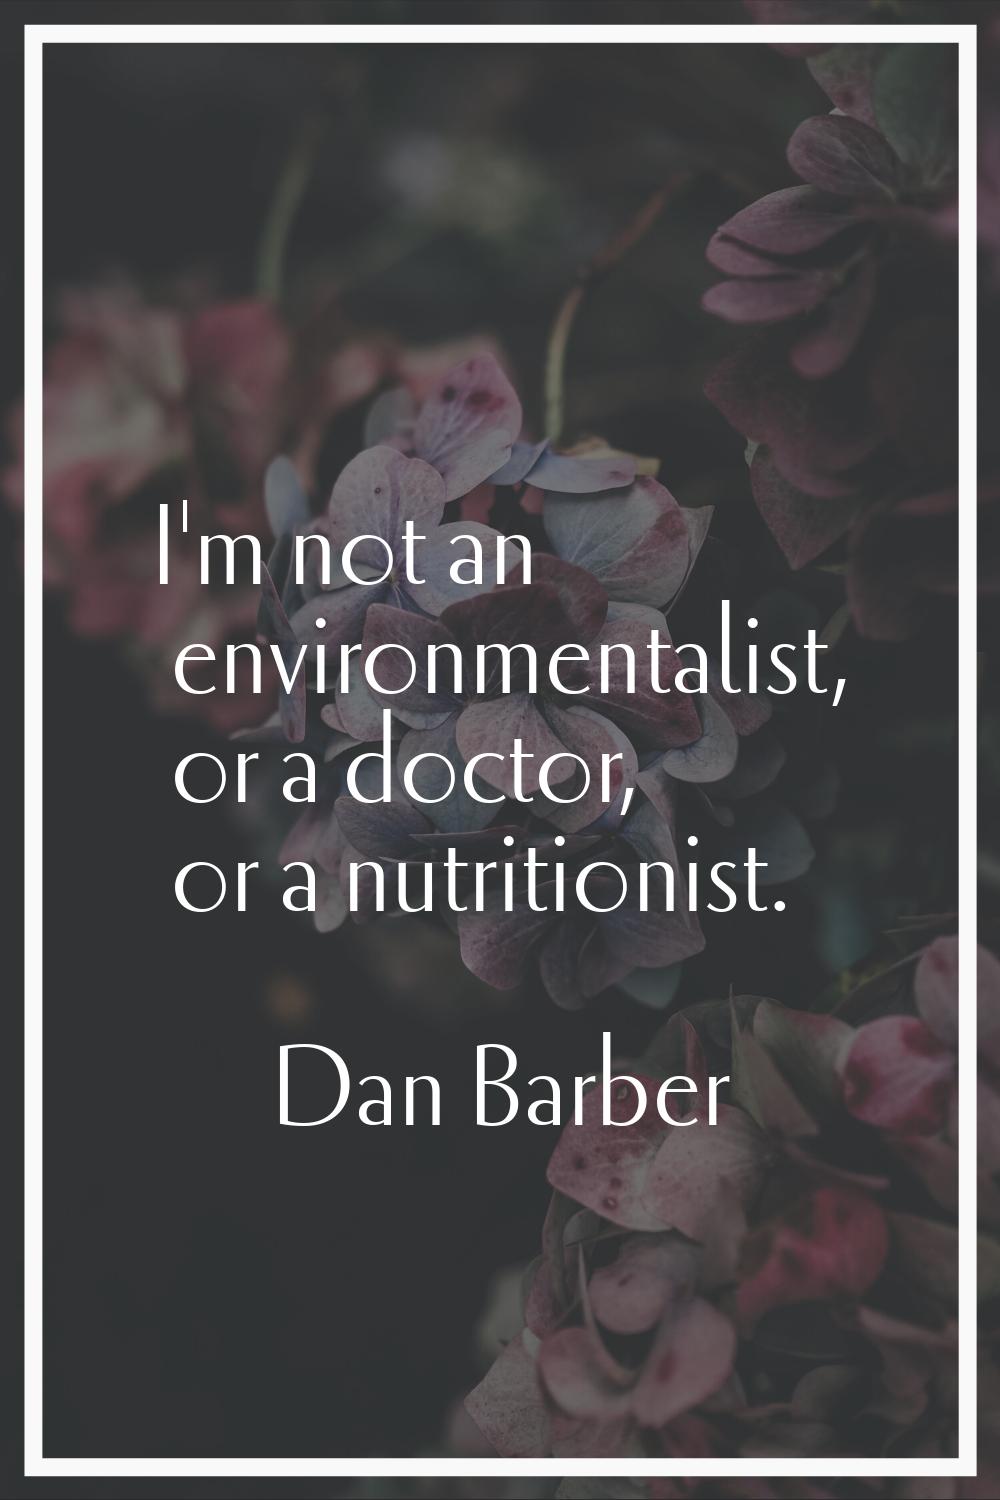 I'm not an environmentalist, or a doctor, or a nutritionist.